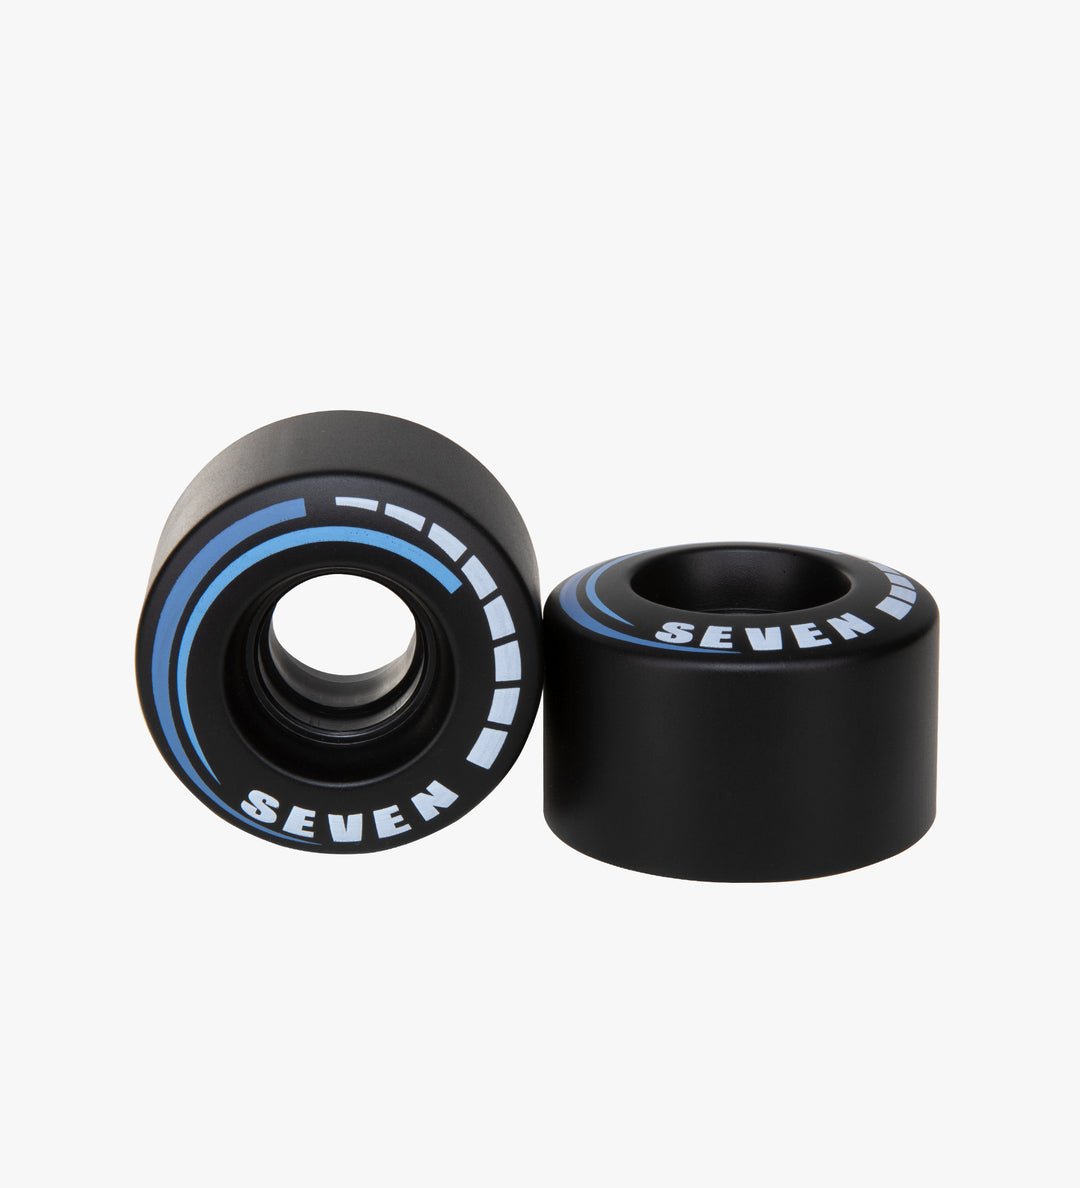 Black C7 roller skate wheels made from durable 82A polyurethane with a 58 mm diameter and 32 mm width